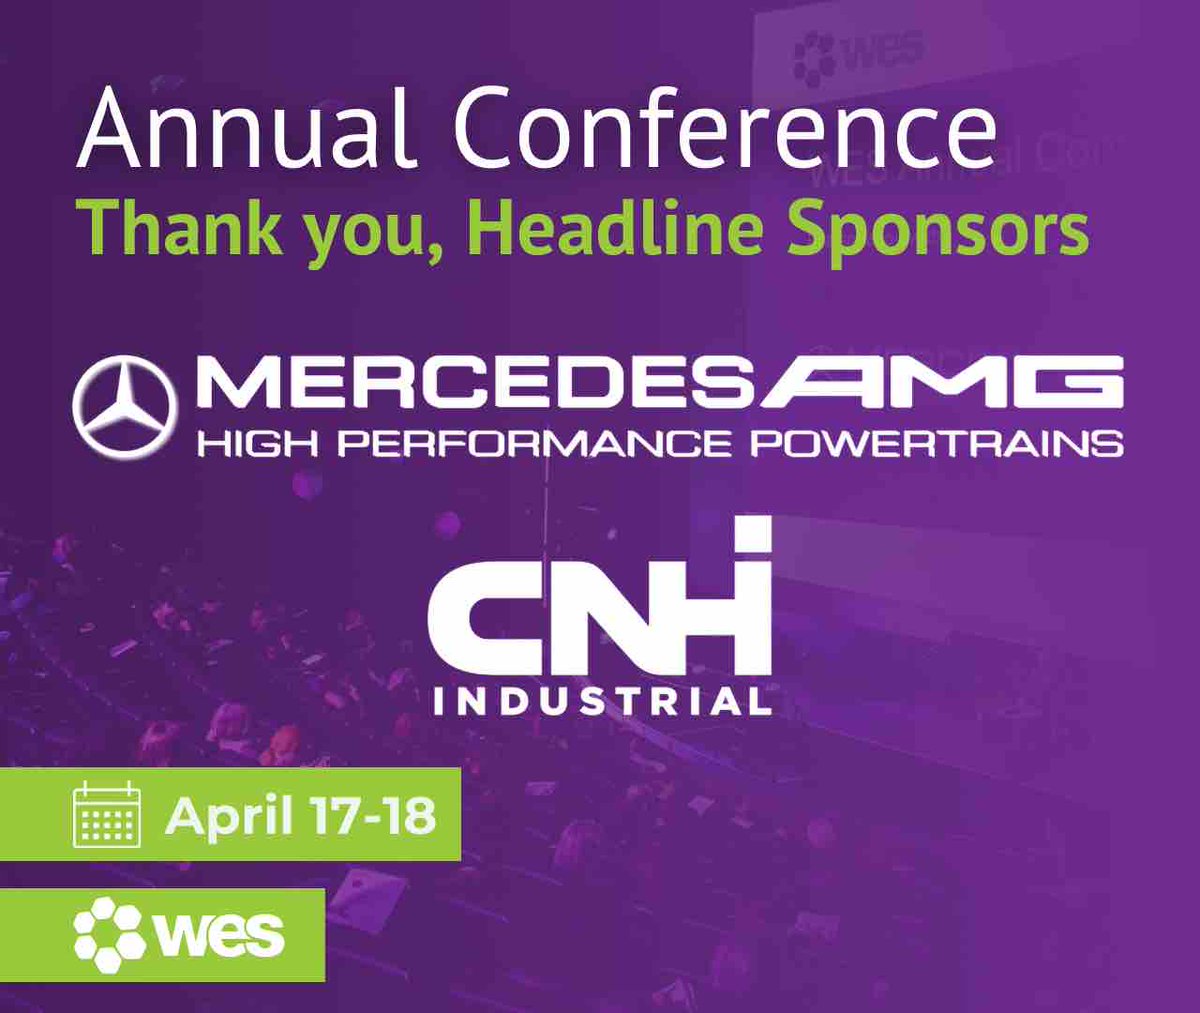 Shoutout to our Headline Sponsors, Mercedes AMG High Performance Powertrains and CNH Industrial 🙏 Their partnership is invaluable and we’re thrilled to have them on board. Book your tickets now for a day filled with networking, and inspiration ow.ly/nSre50R4sbn